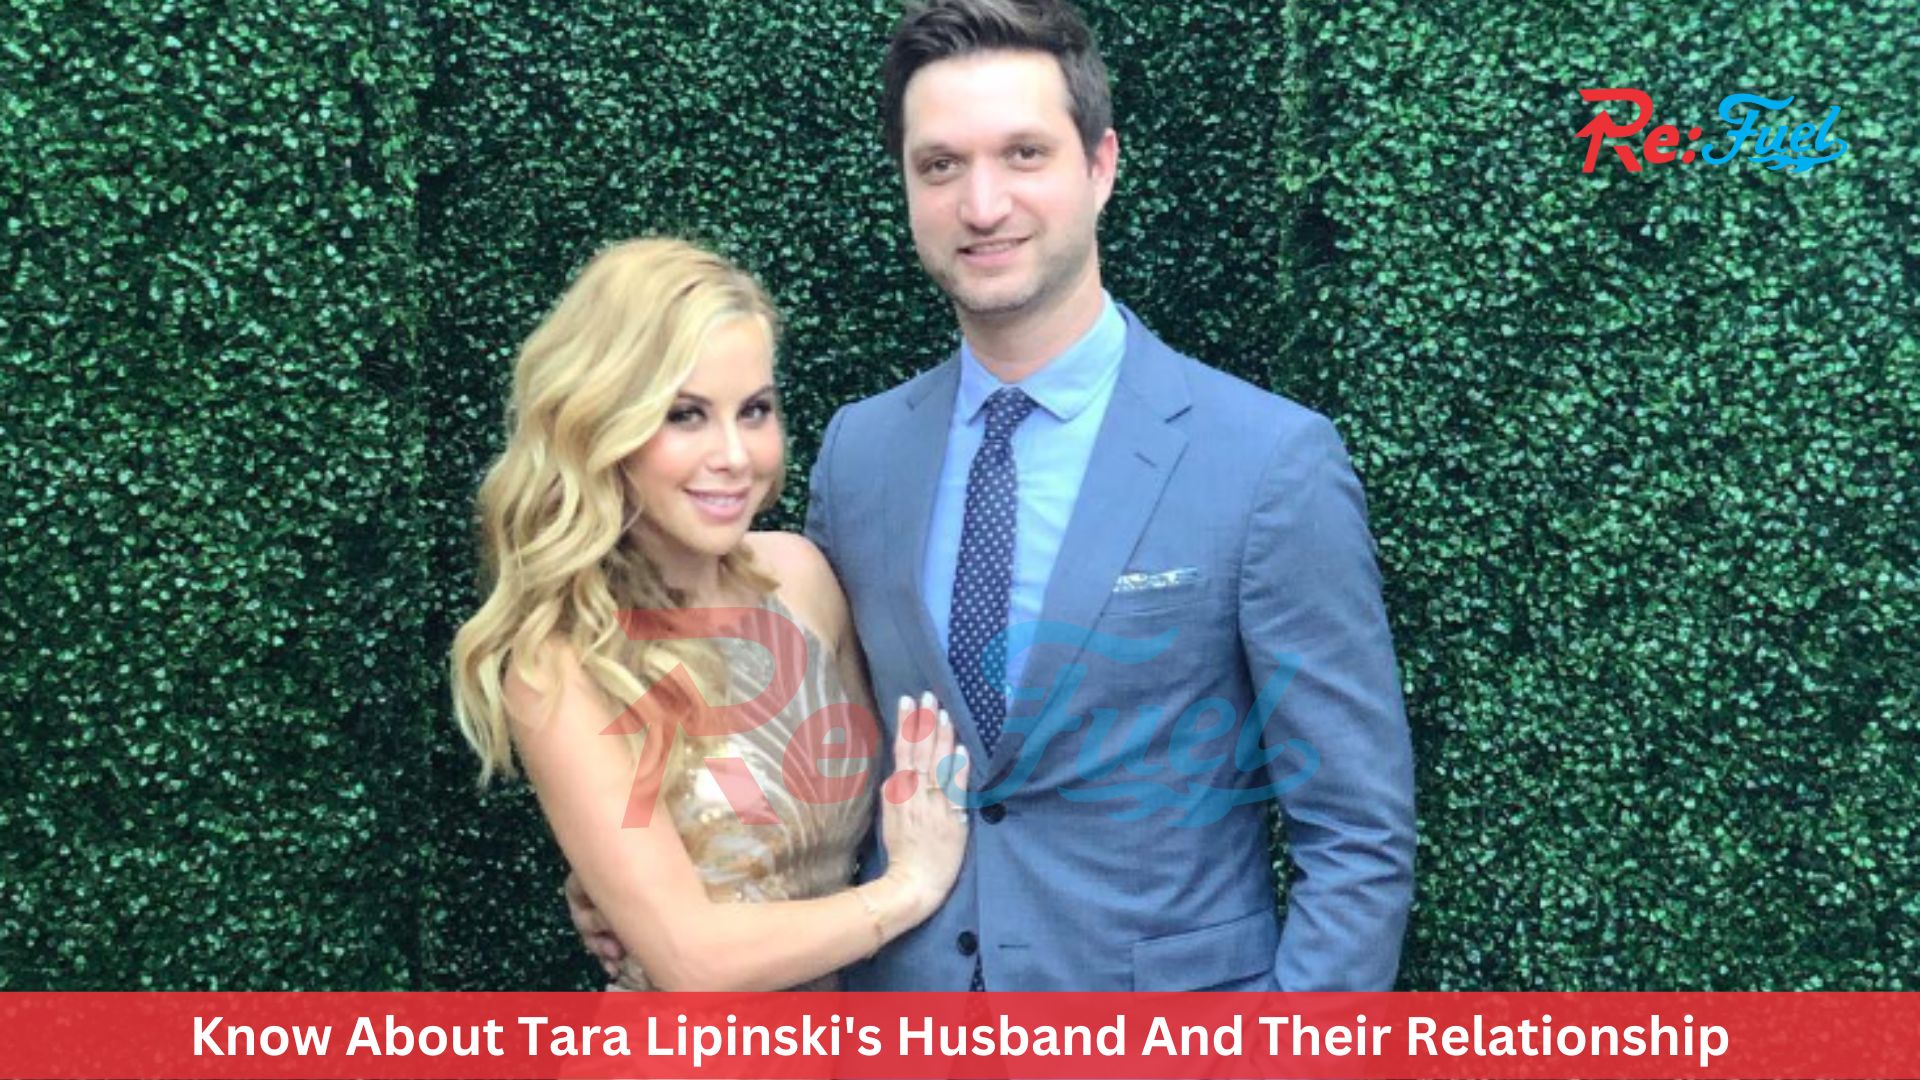 Know About Tara Lipinski's Husband And Their Relationship